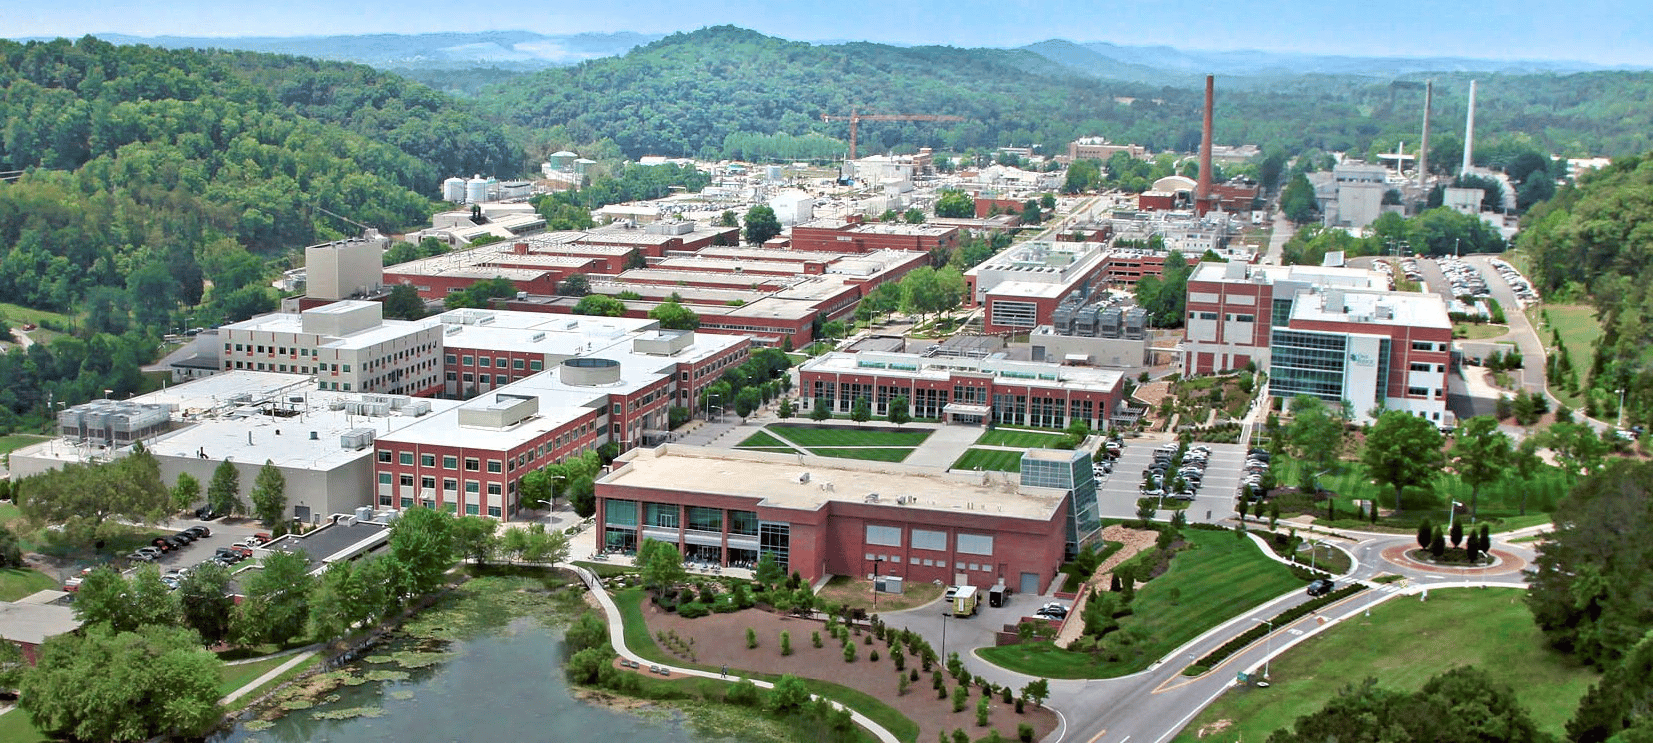 An aerial view of the Oak Ridge National Laboratory campus